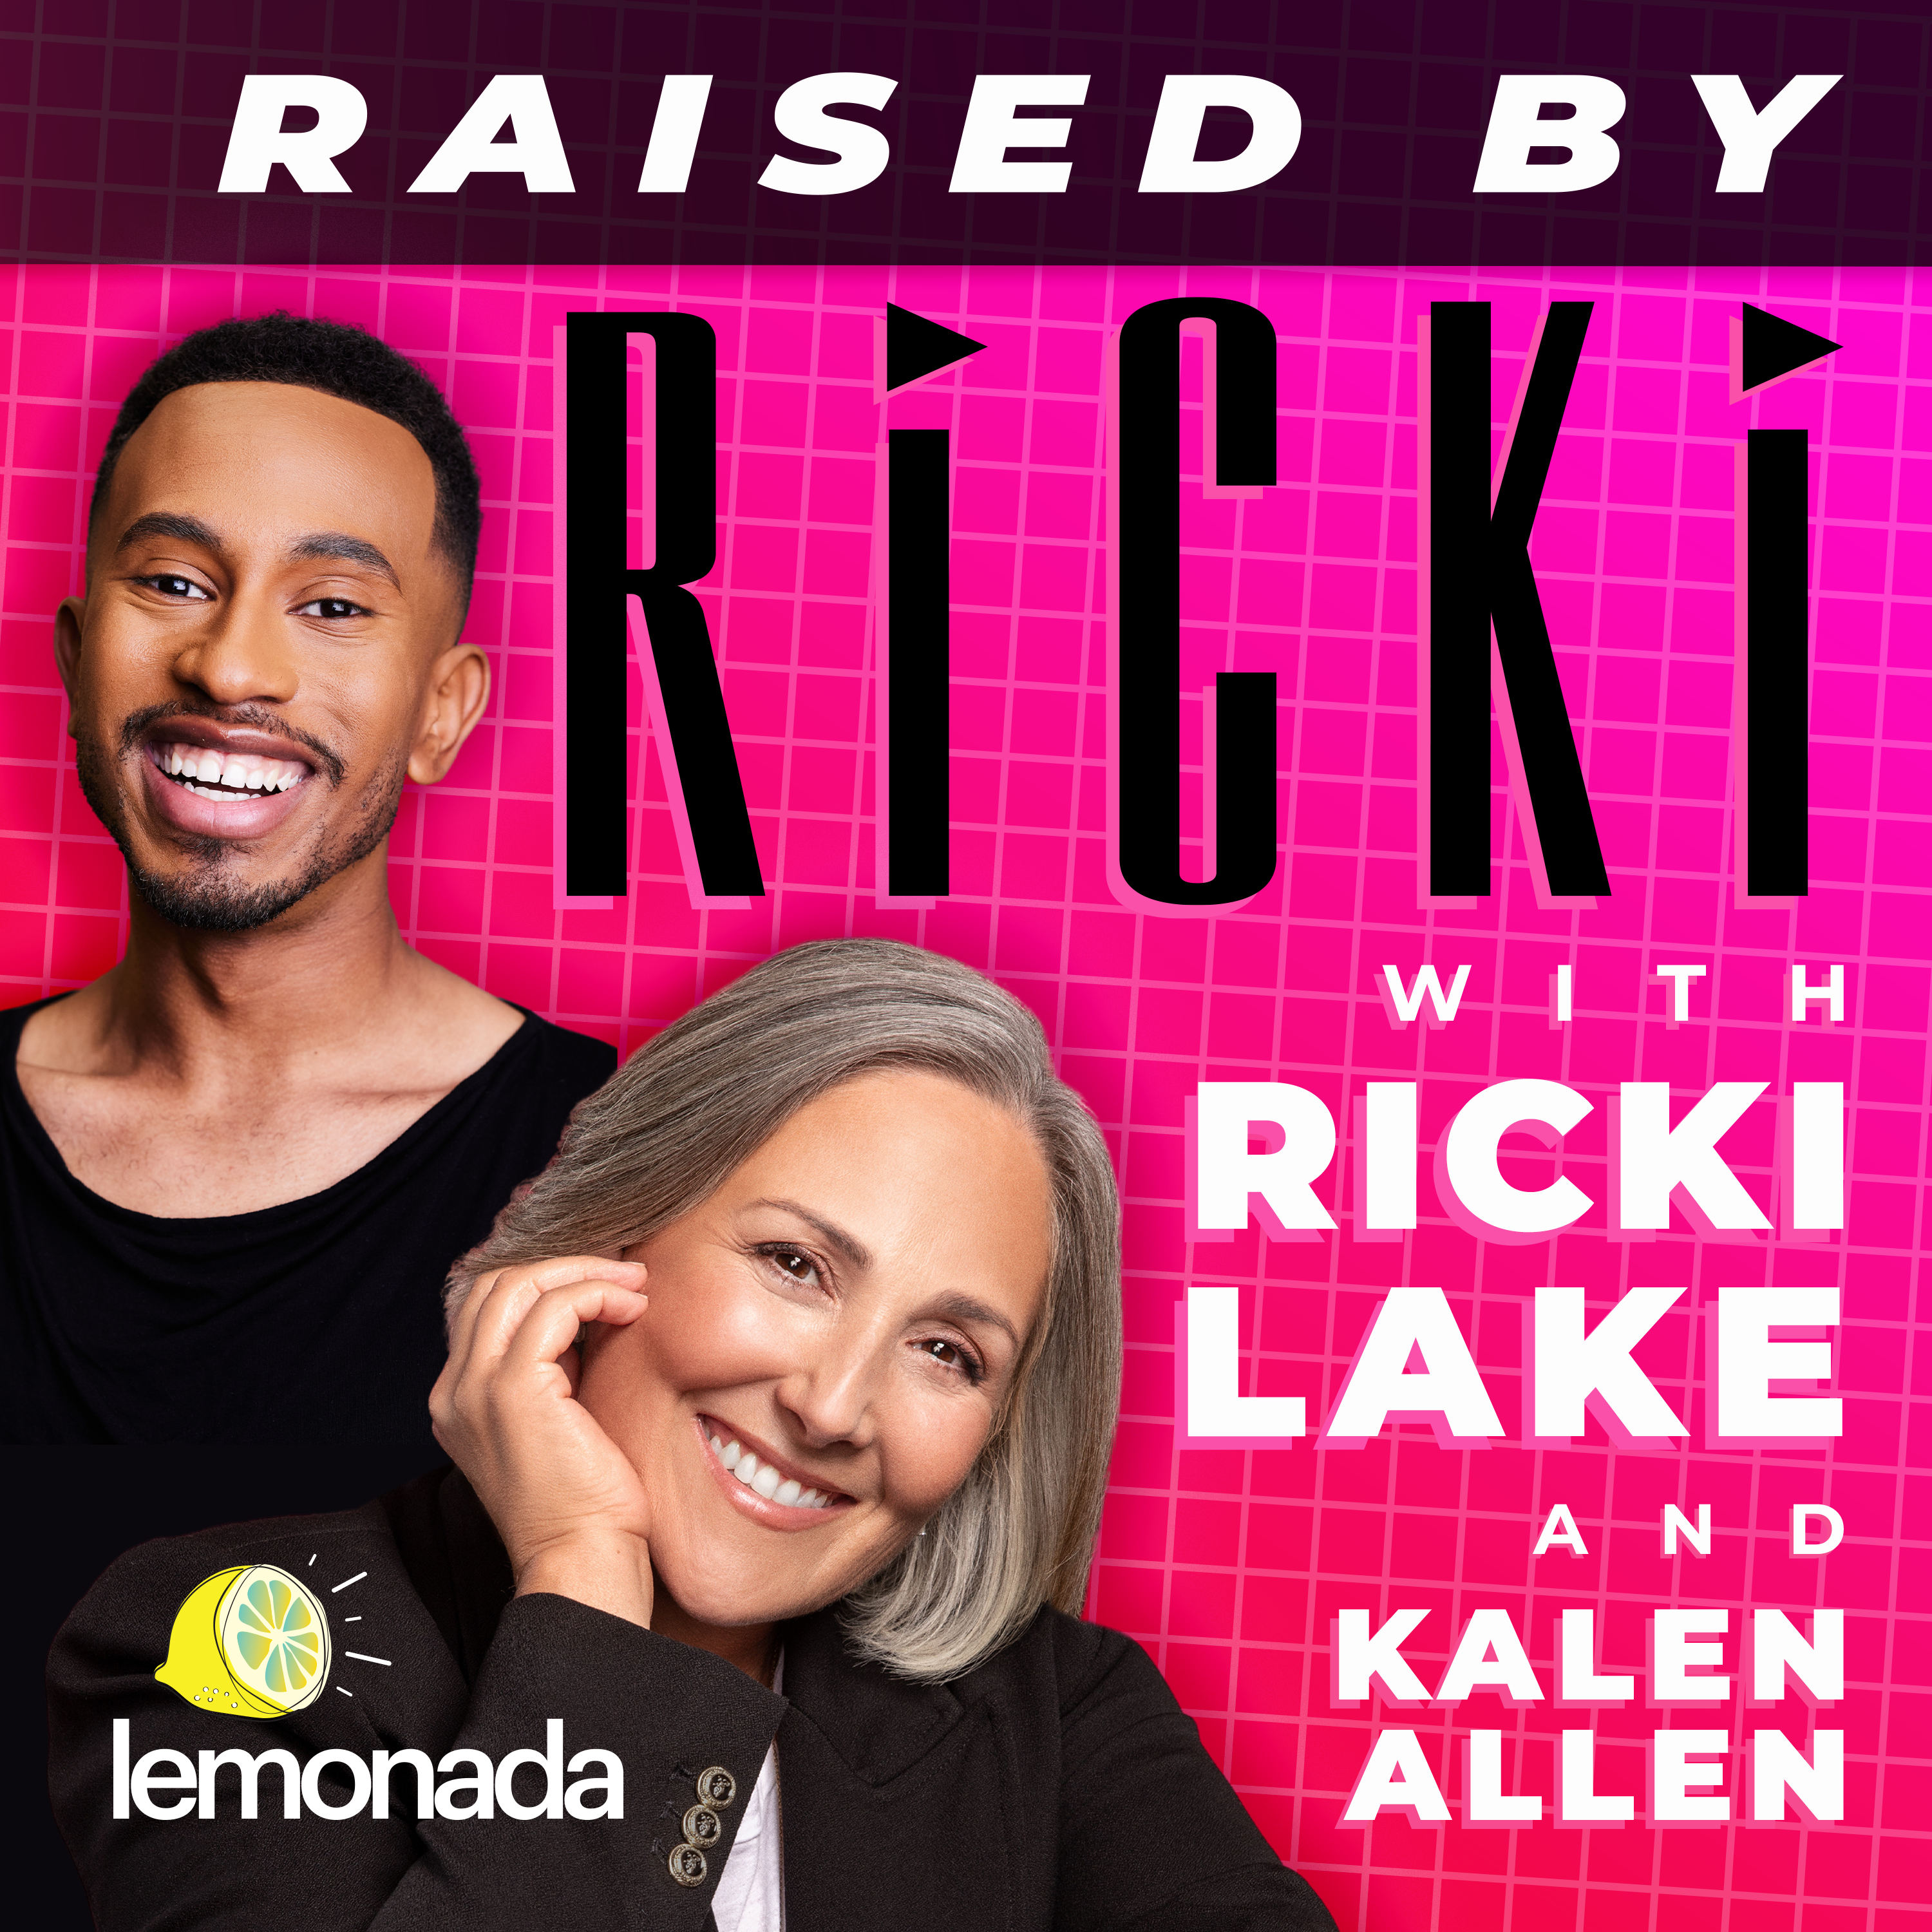 U Got It Bad … for The Ricki Lake Show’s Musical Guests